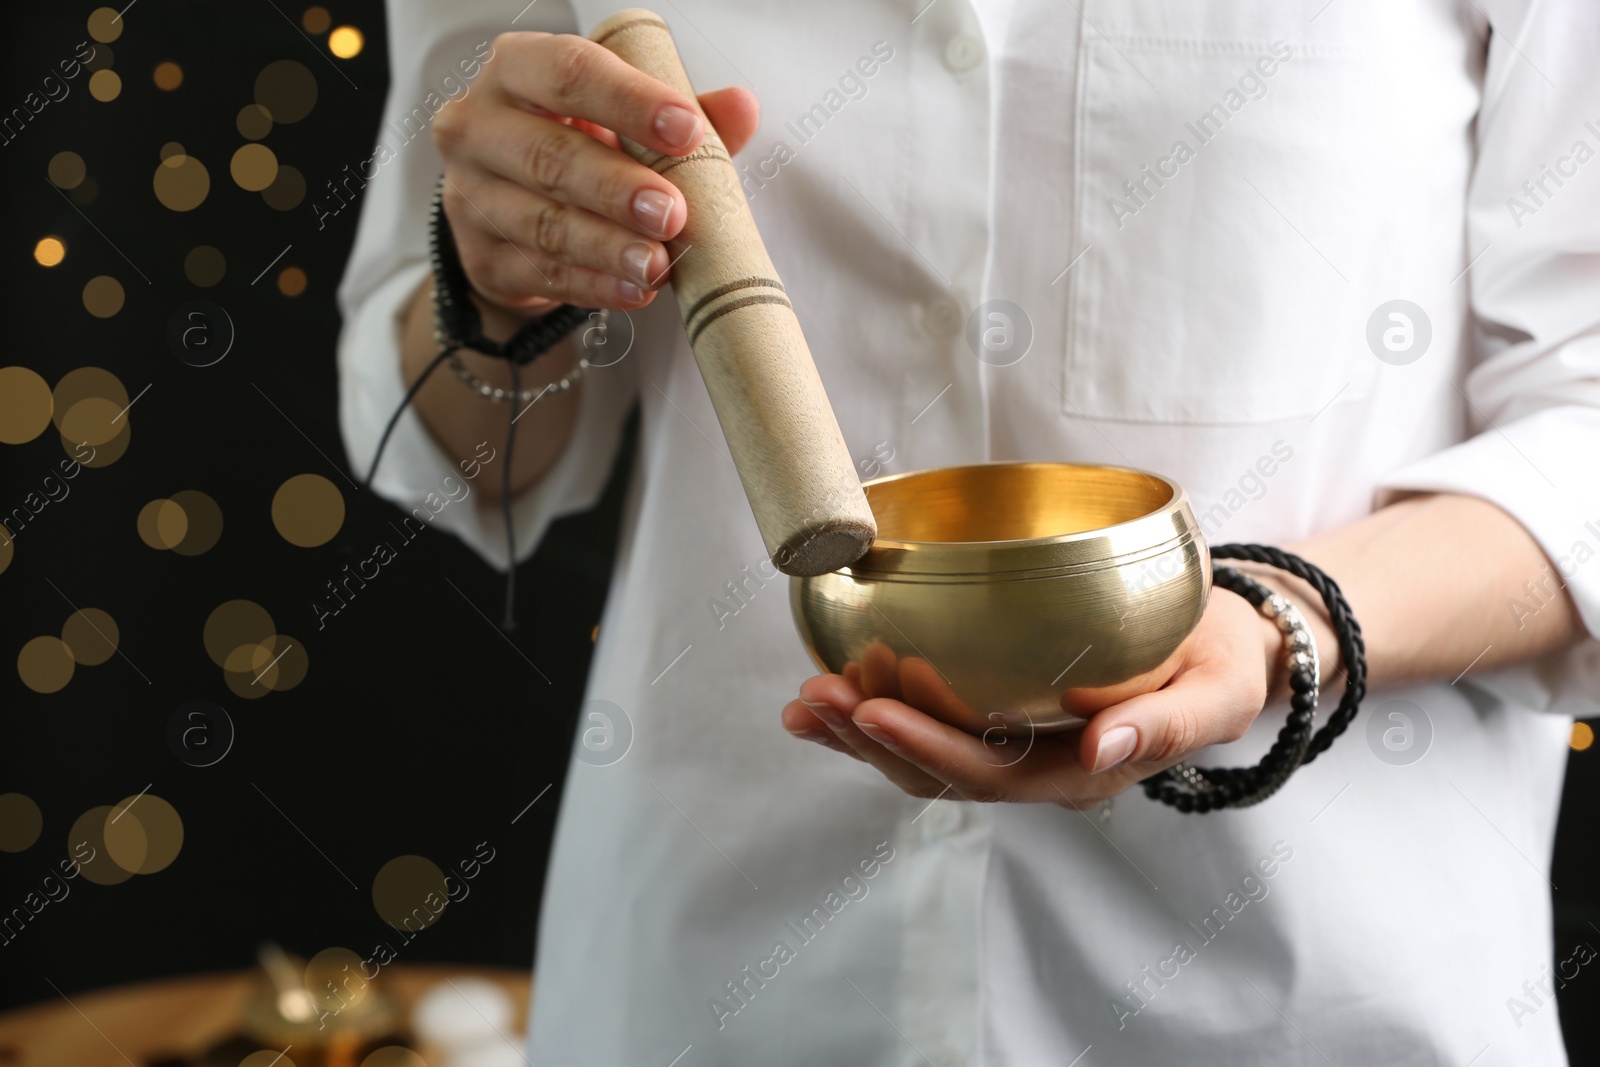 Photo of Woman using singing bowl in sound healing therapy on black background, closeup